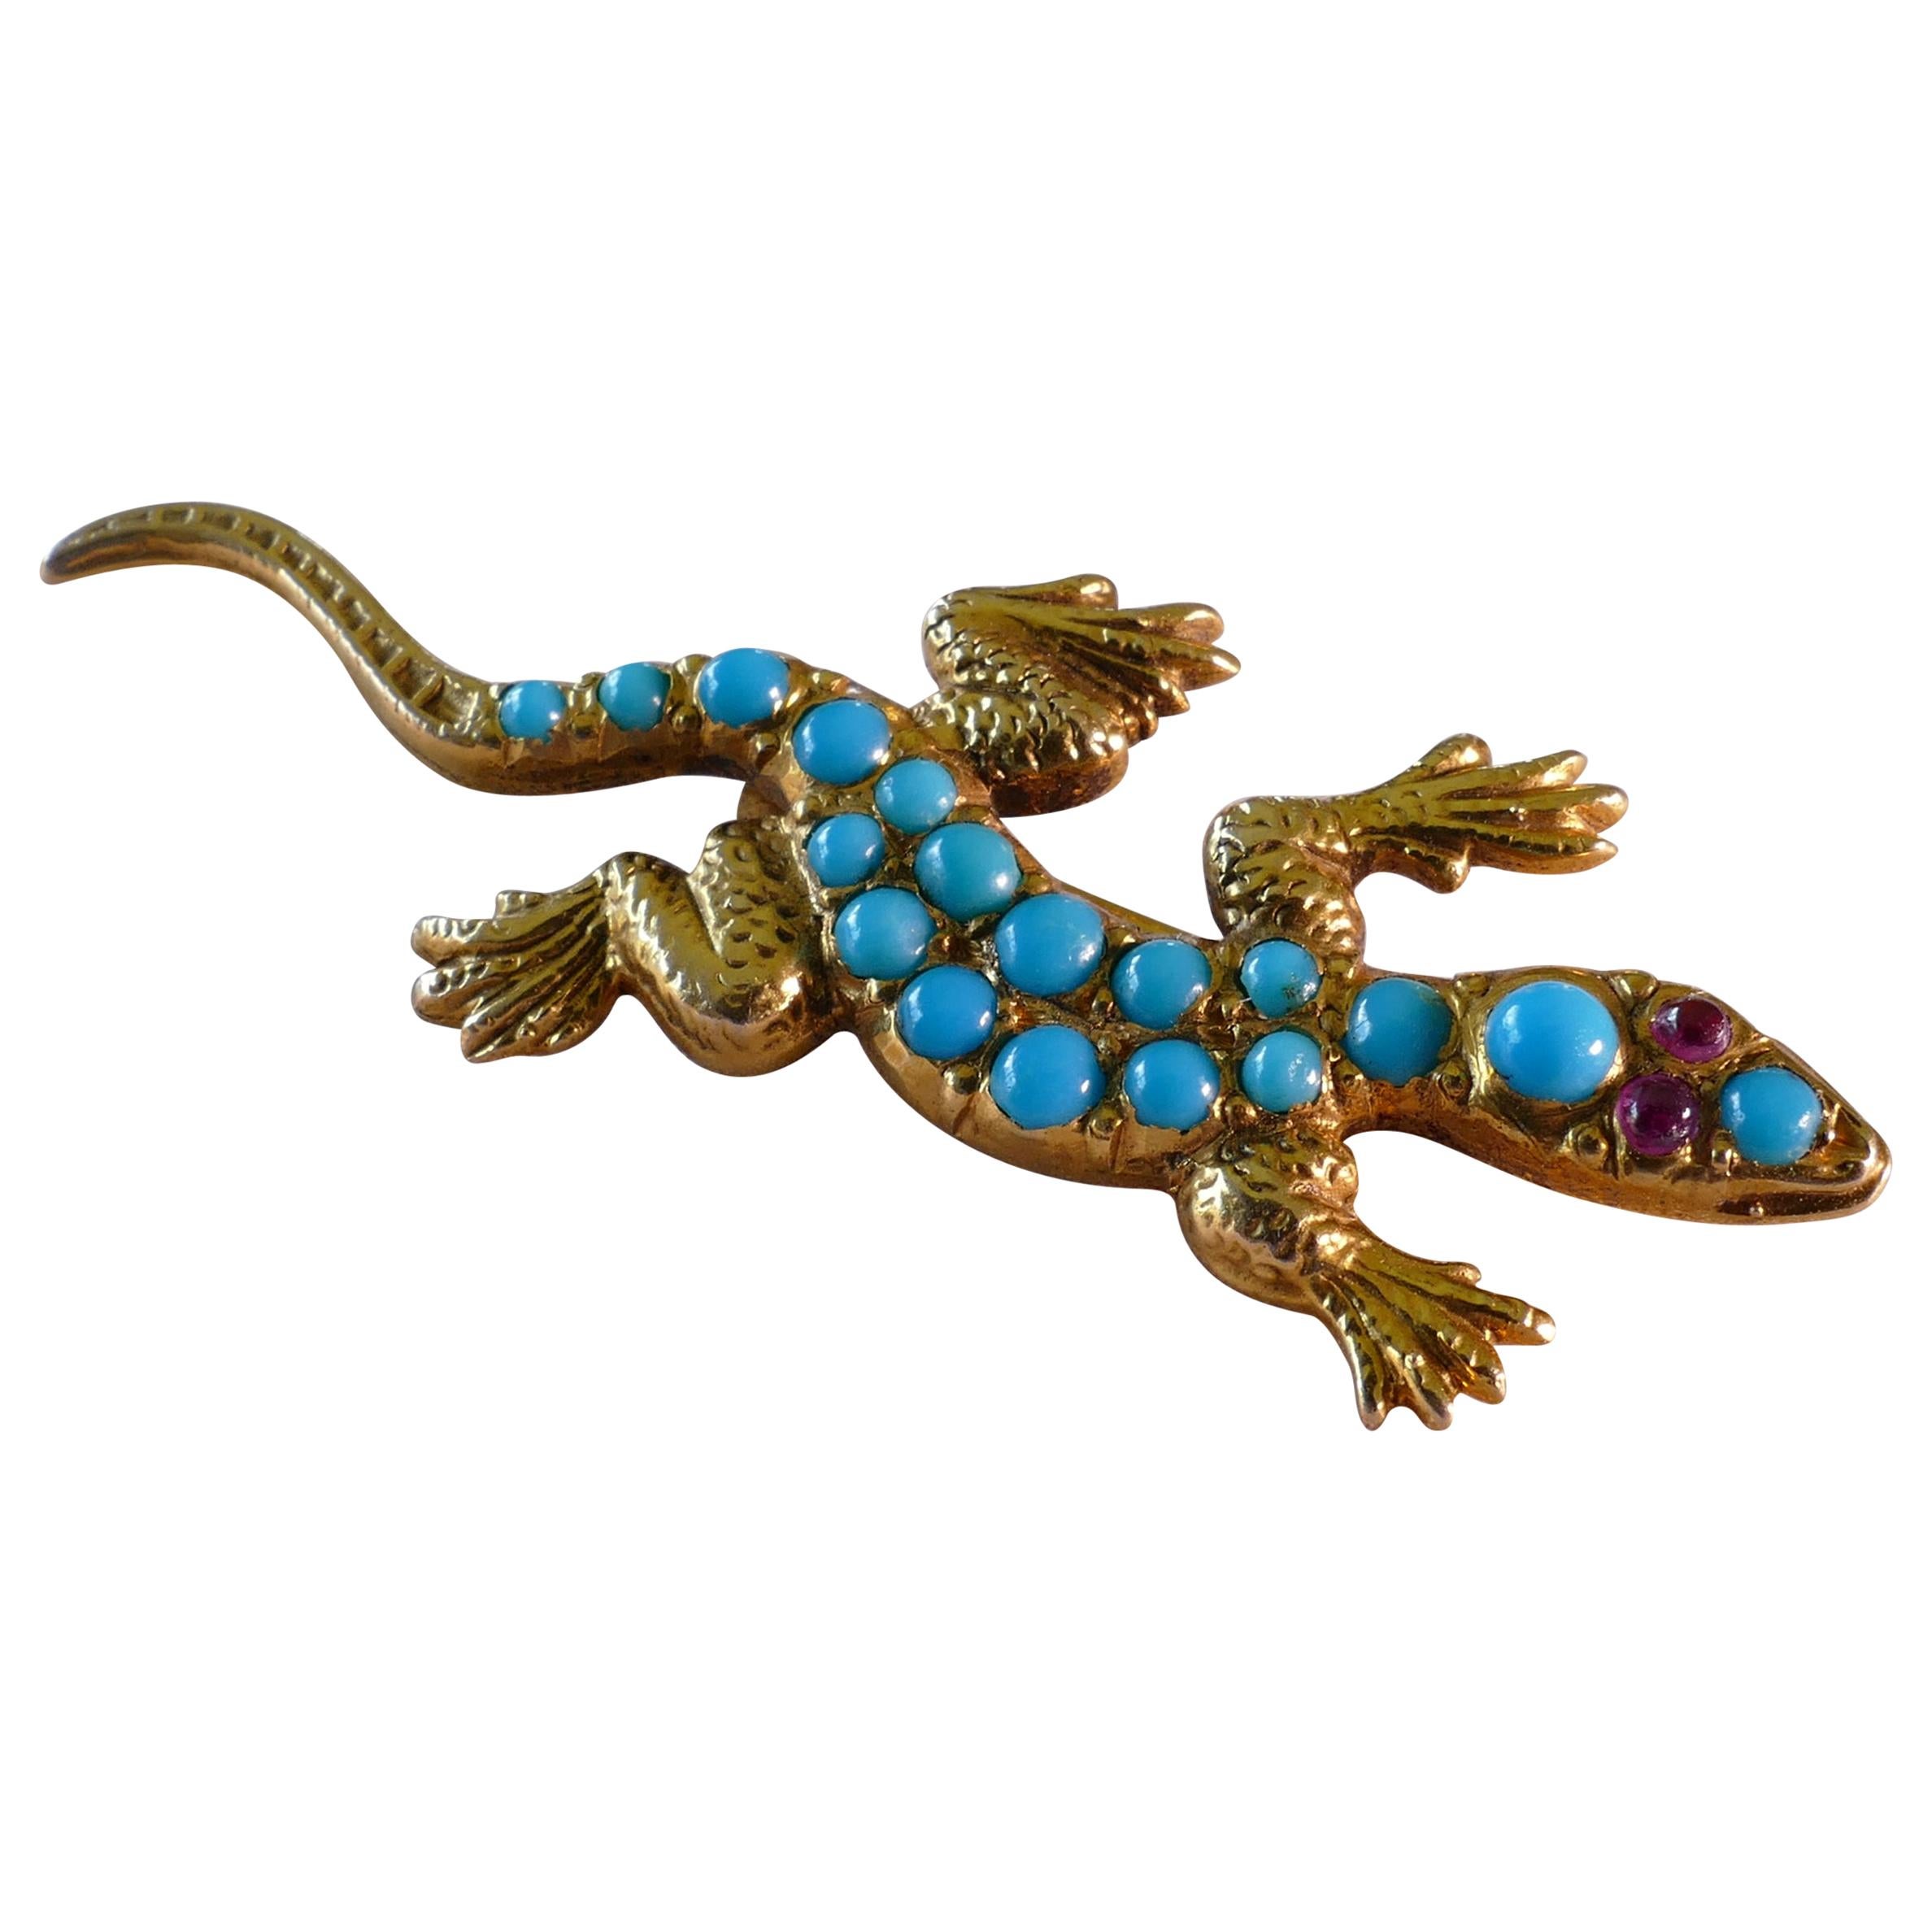 This beautiful piece of Antiquity, the Lizard Brooch, is comprised of 18 Cabochon Cut Turquoise Stones. 
The eyes are made of 2 round Cabochon Cut Rubies of a vivid pinkish red.
Valuation attached.